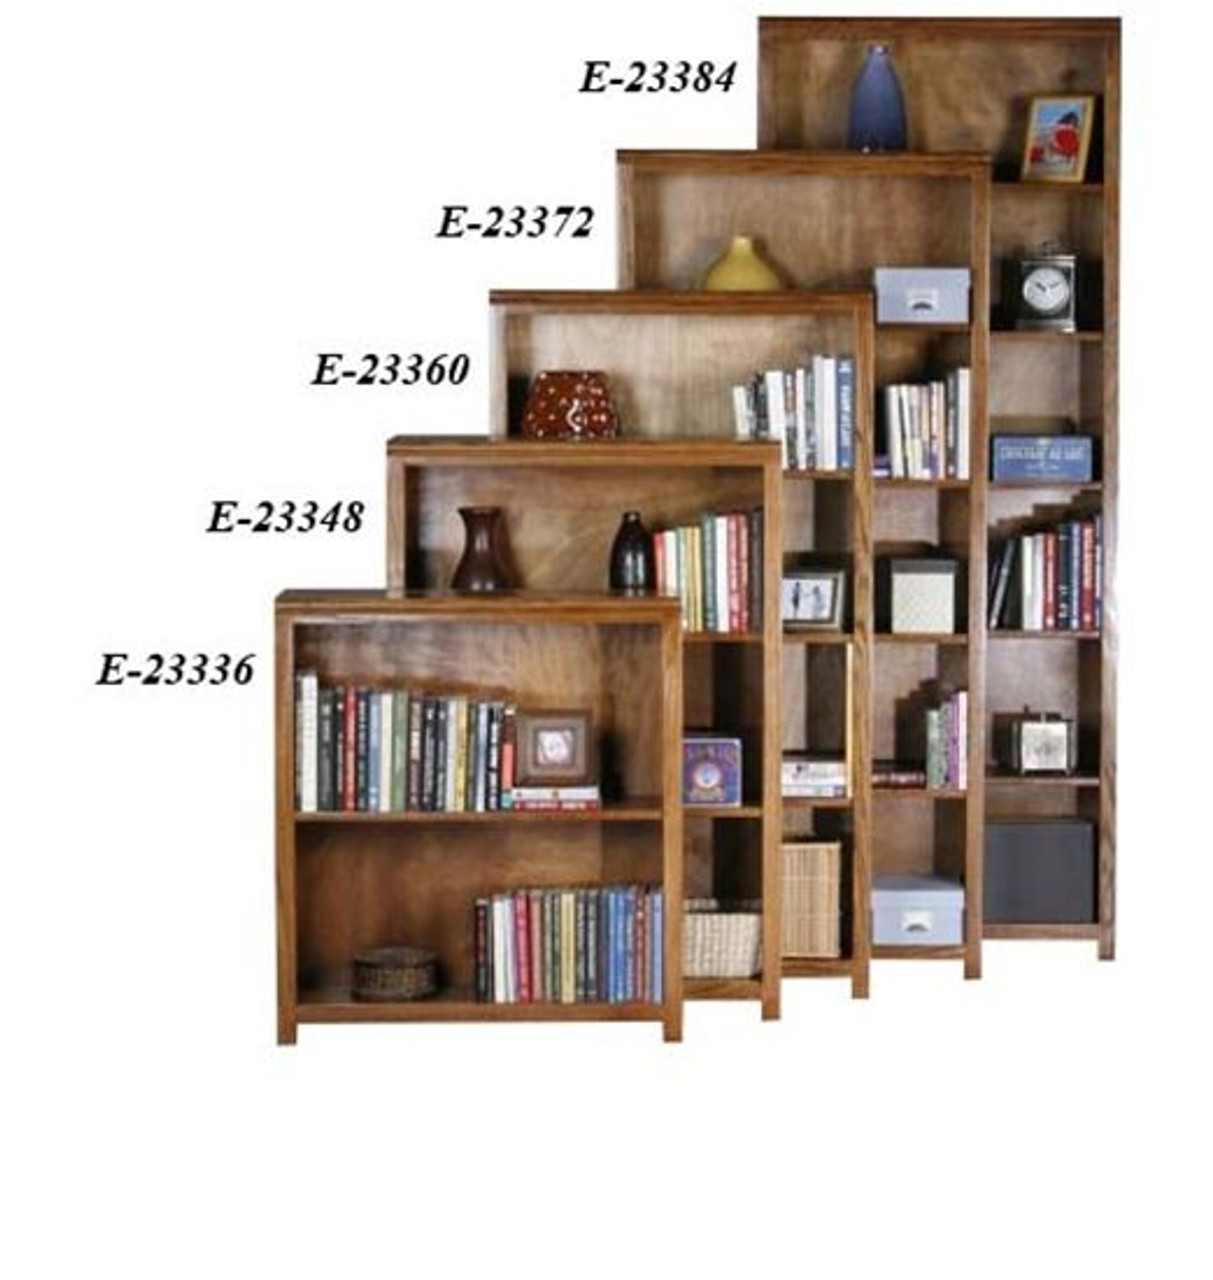 Eagle Industries 23360 32 x 60" Bookcase Traditional Solid Wood Medium Stain Book Case Student College Dorm Bookcase with 3 Fixed Book Storage Shelves, Oak Stain Finishes Available, Eagle Part # E-23360